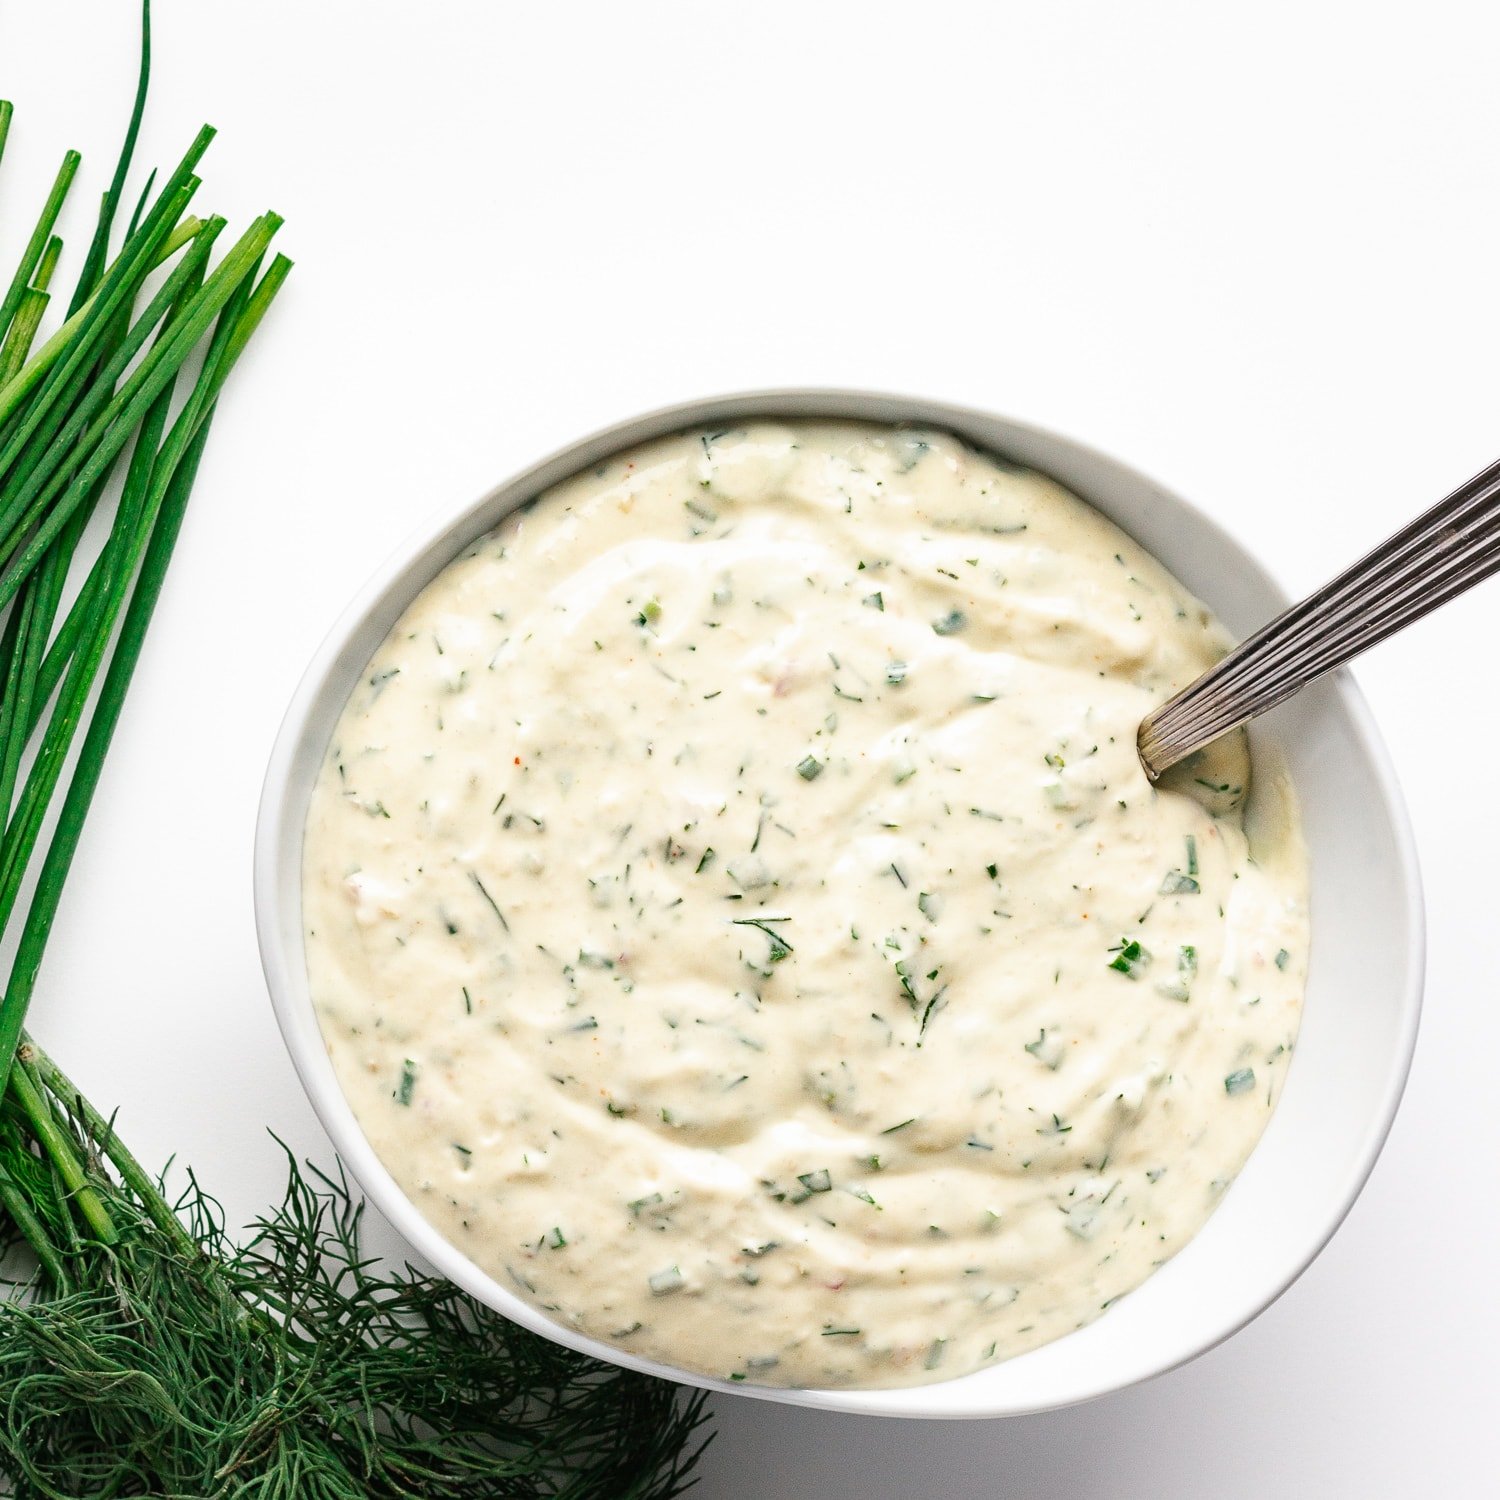 Overhead photo of creamy herb sauce/dip in a white bowl with silver spoon handle sticking out.  Scattering of chives and dill to the left of the bowl.